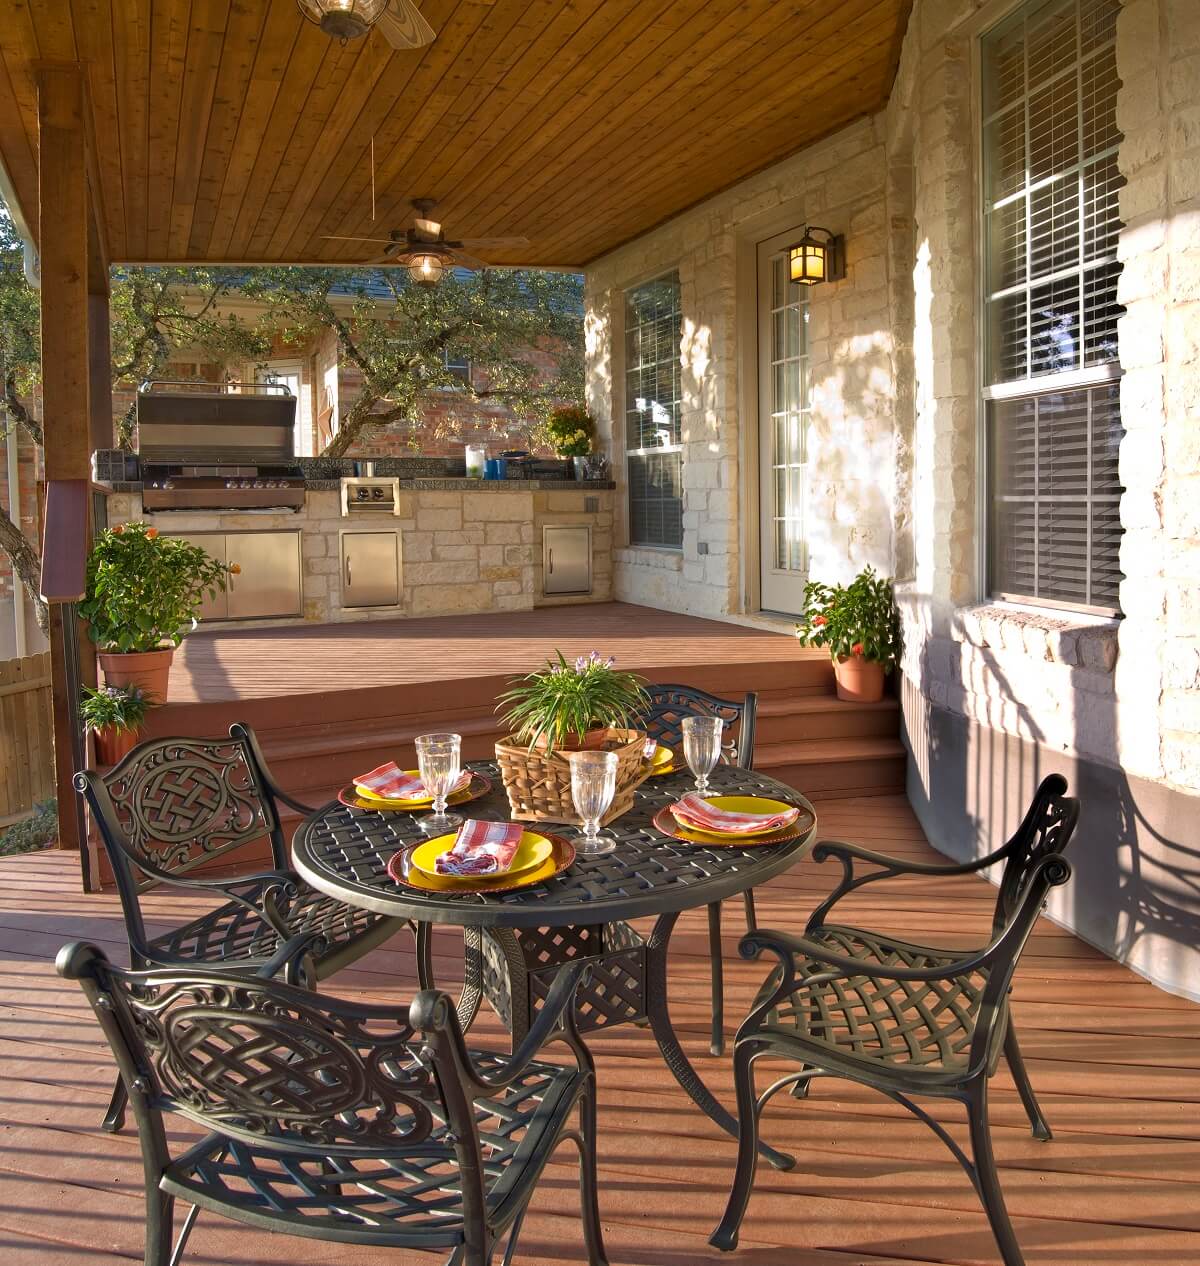 Outdoor kitchen and seating 